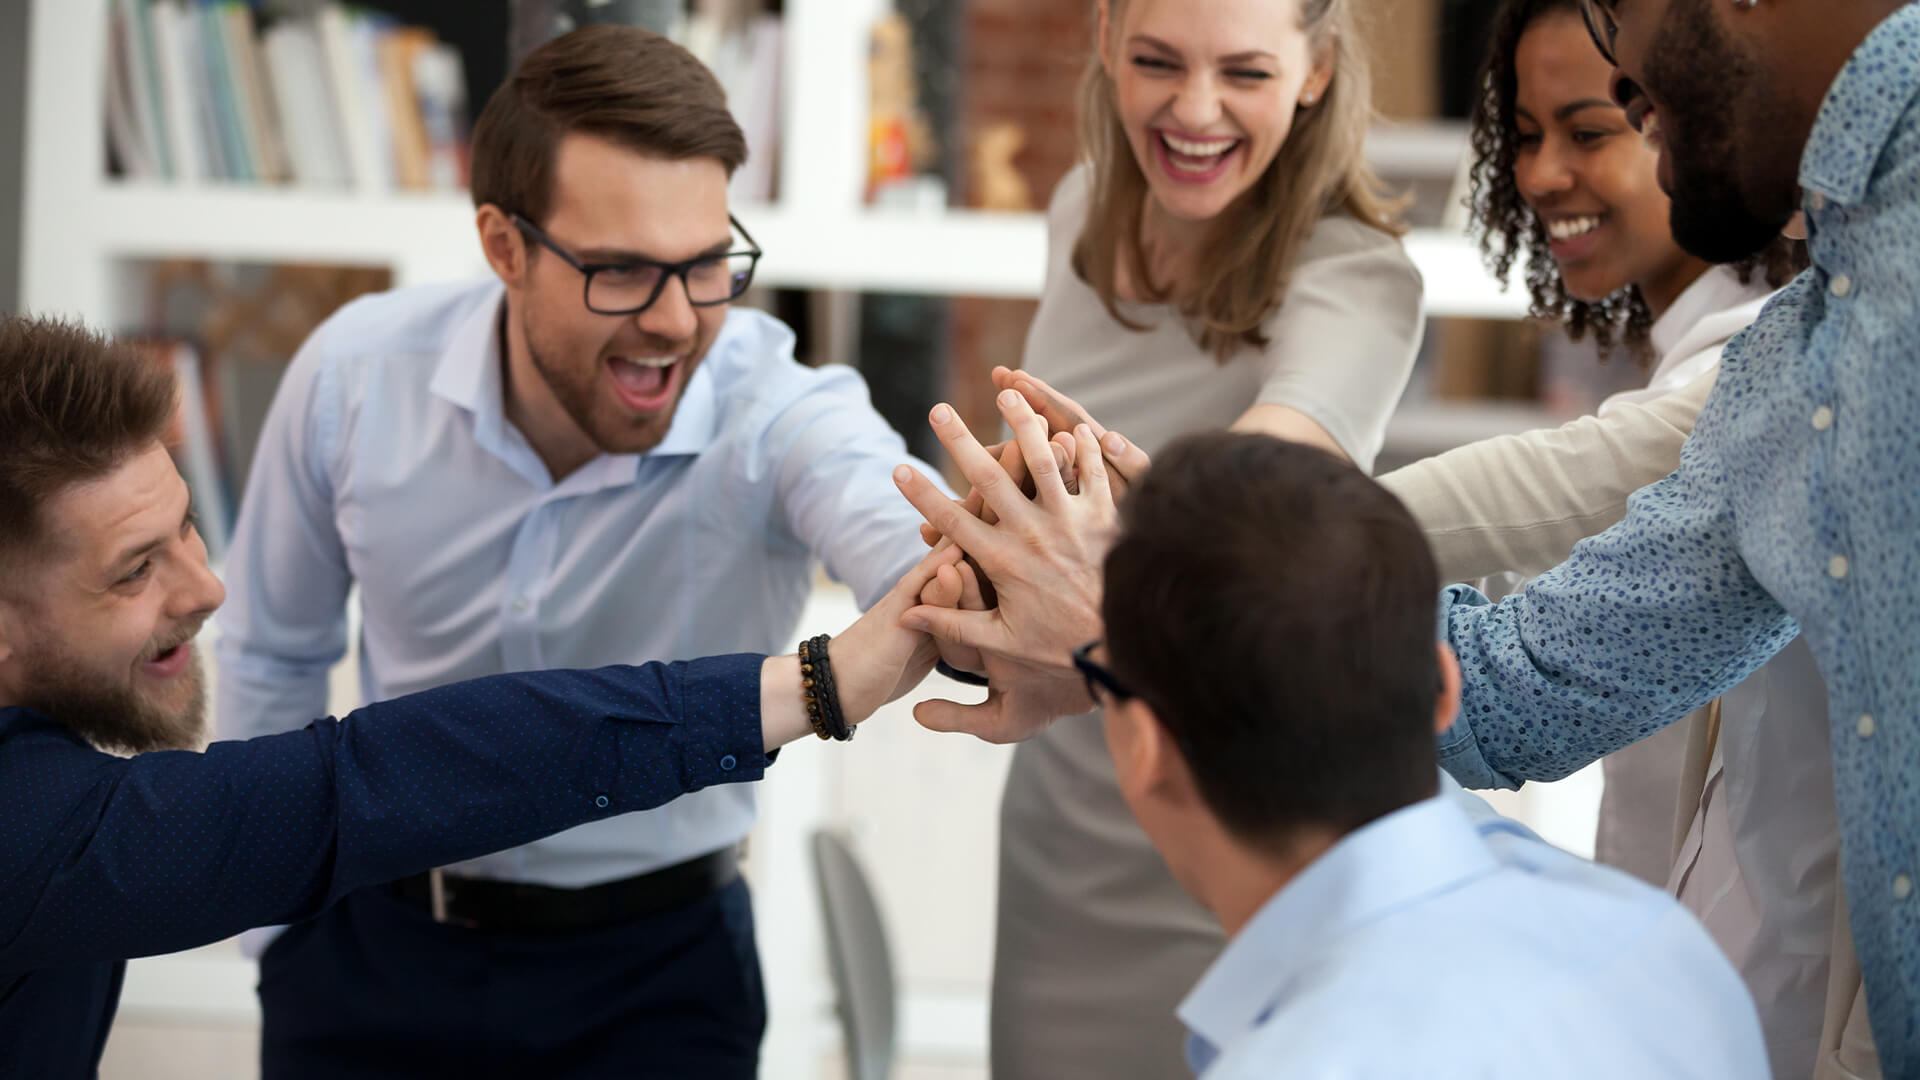 Excited motivated multi-ethnic team people give high five in office